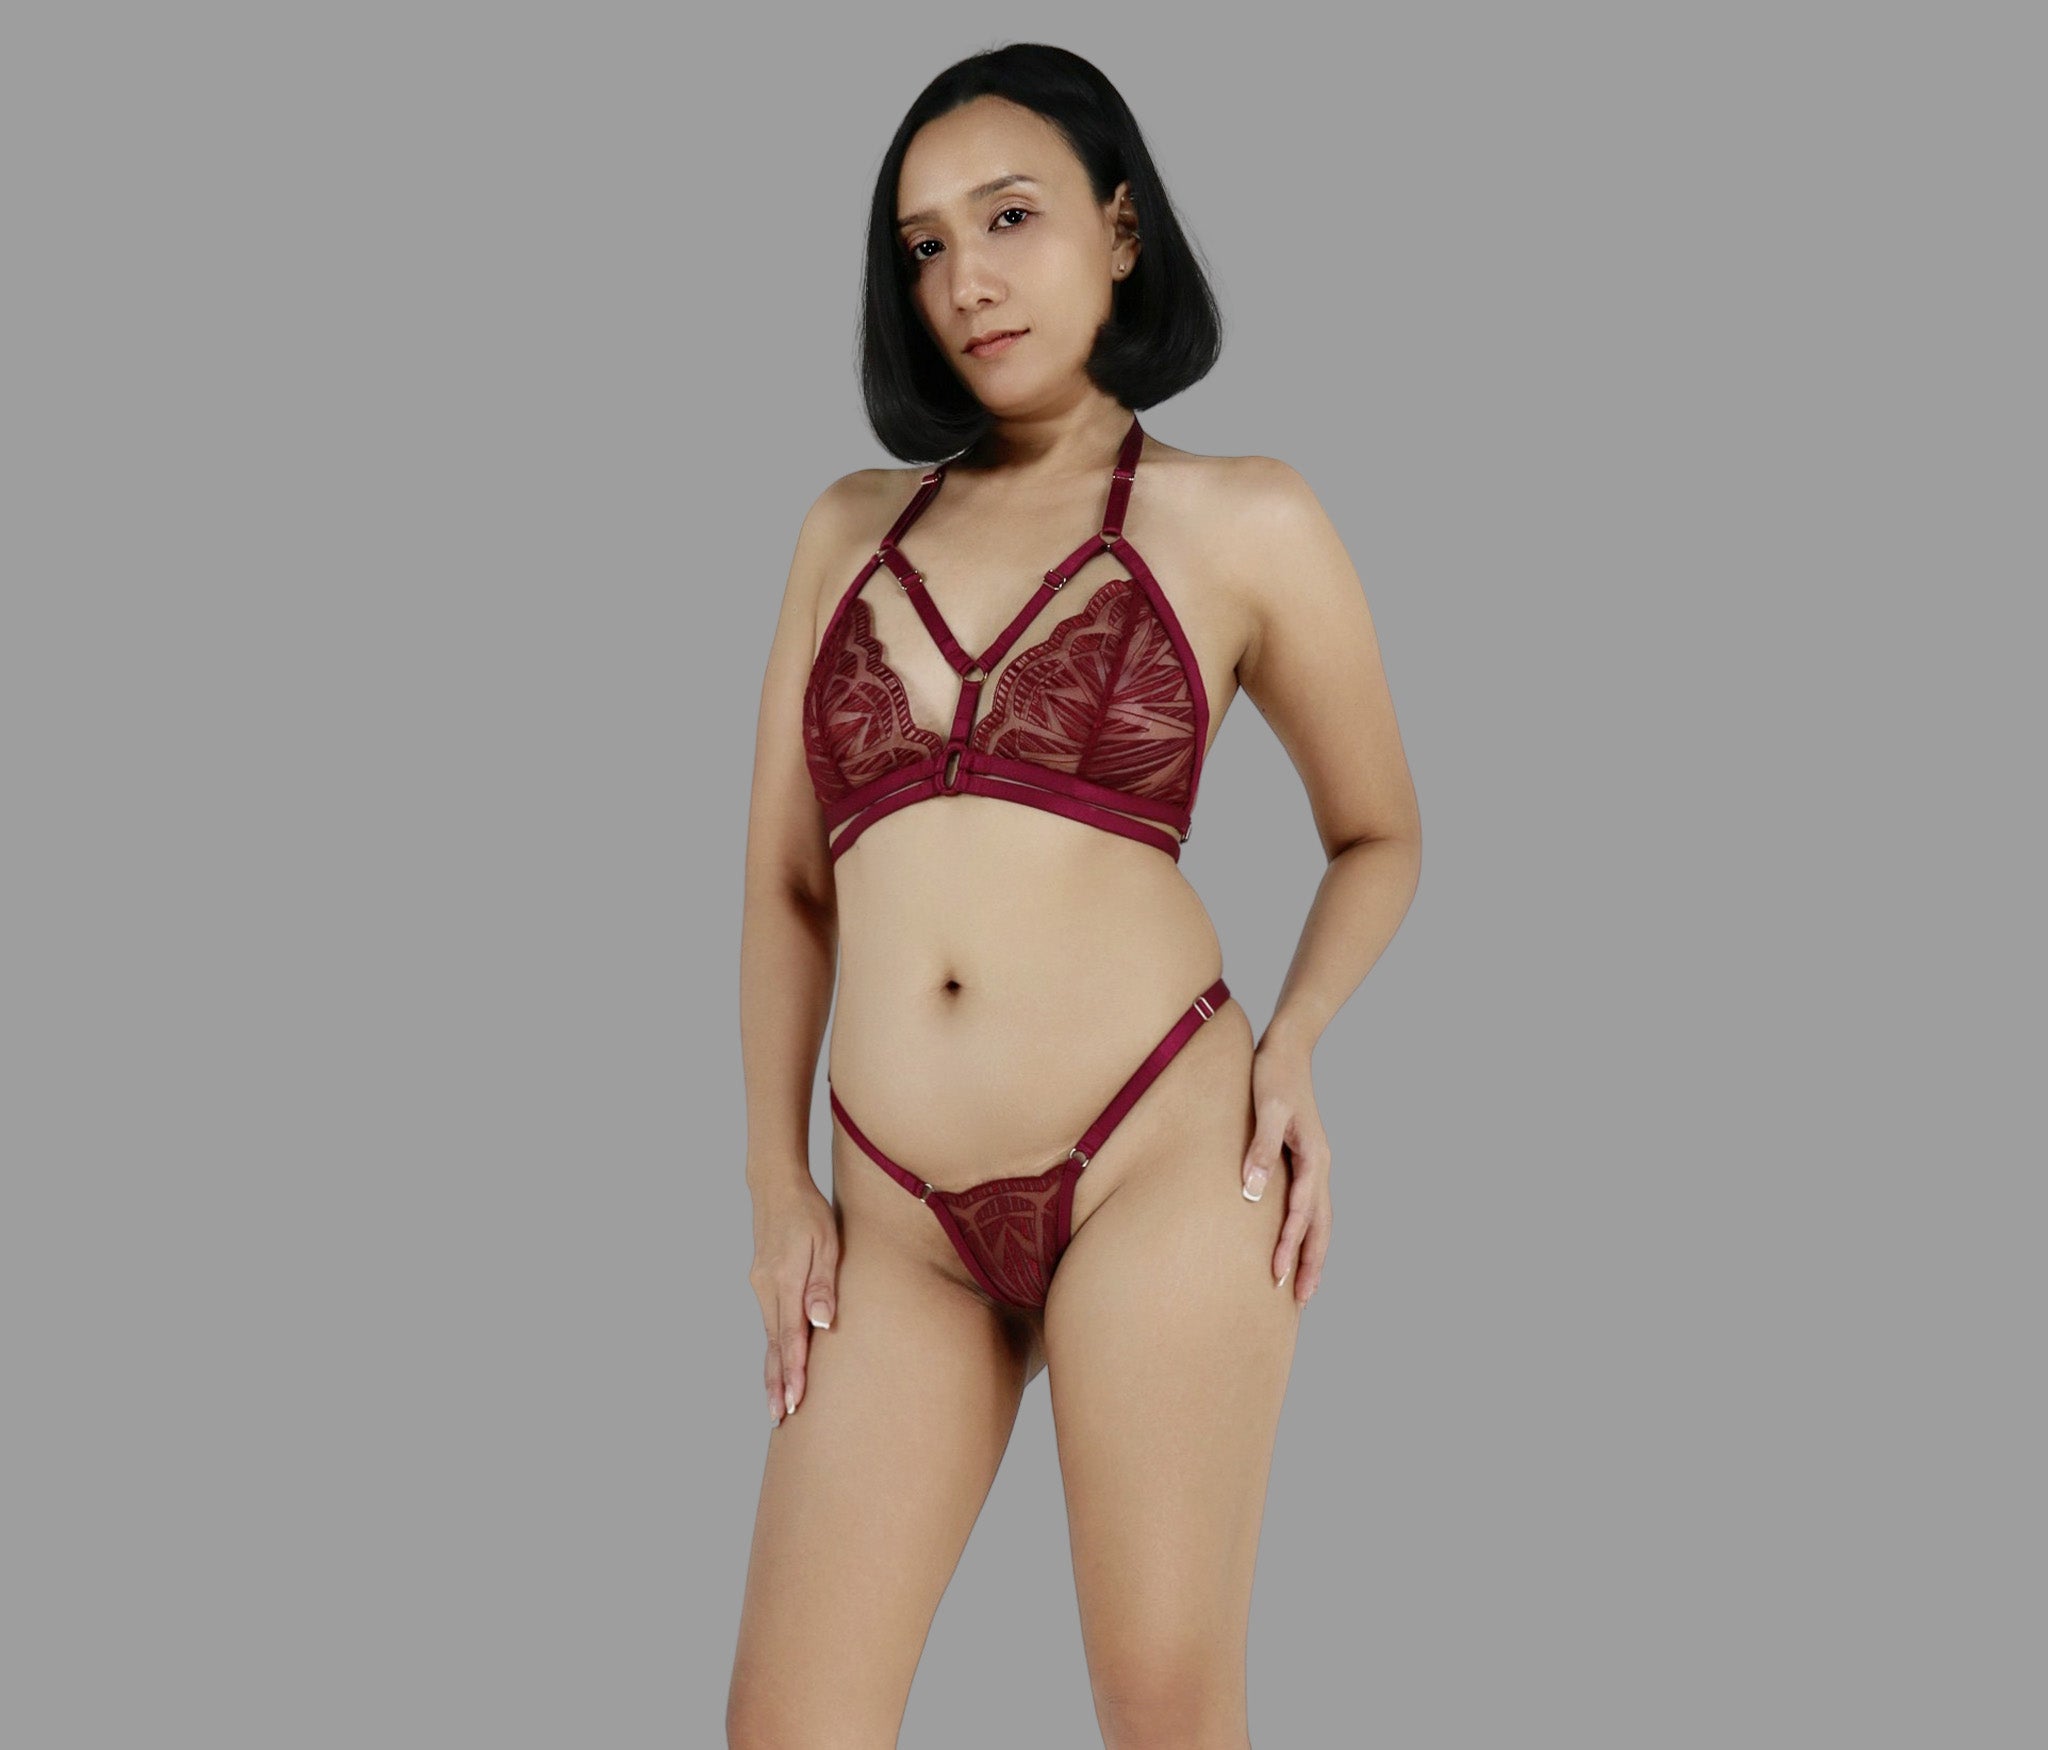 Sexy see through lingerie set in burgundy red lace strappy harness bra sheer adjustable panties g string - Ange Déchu